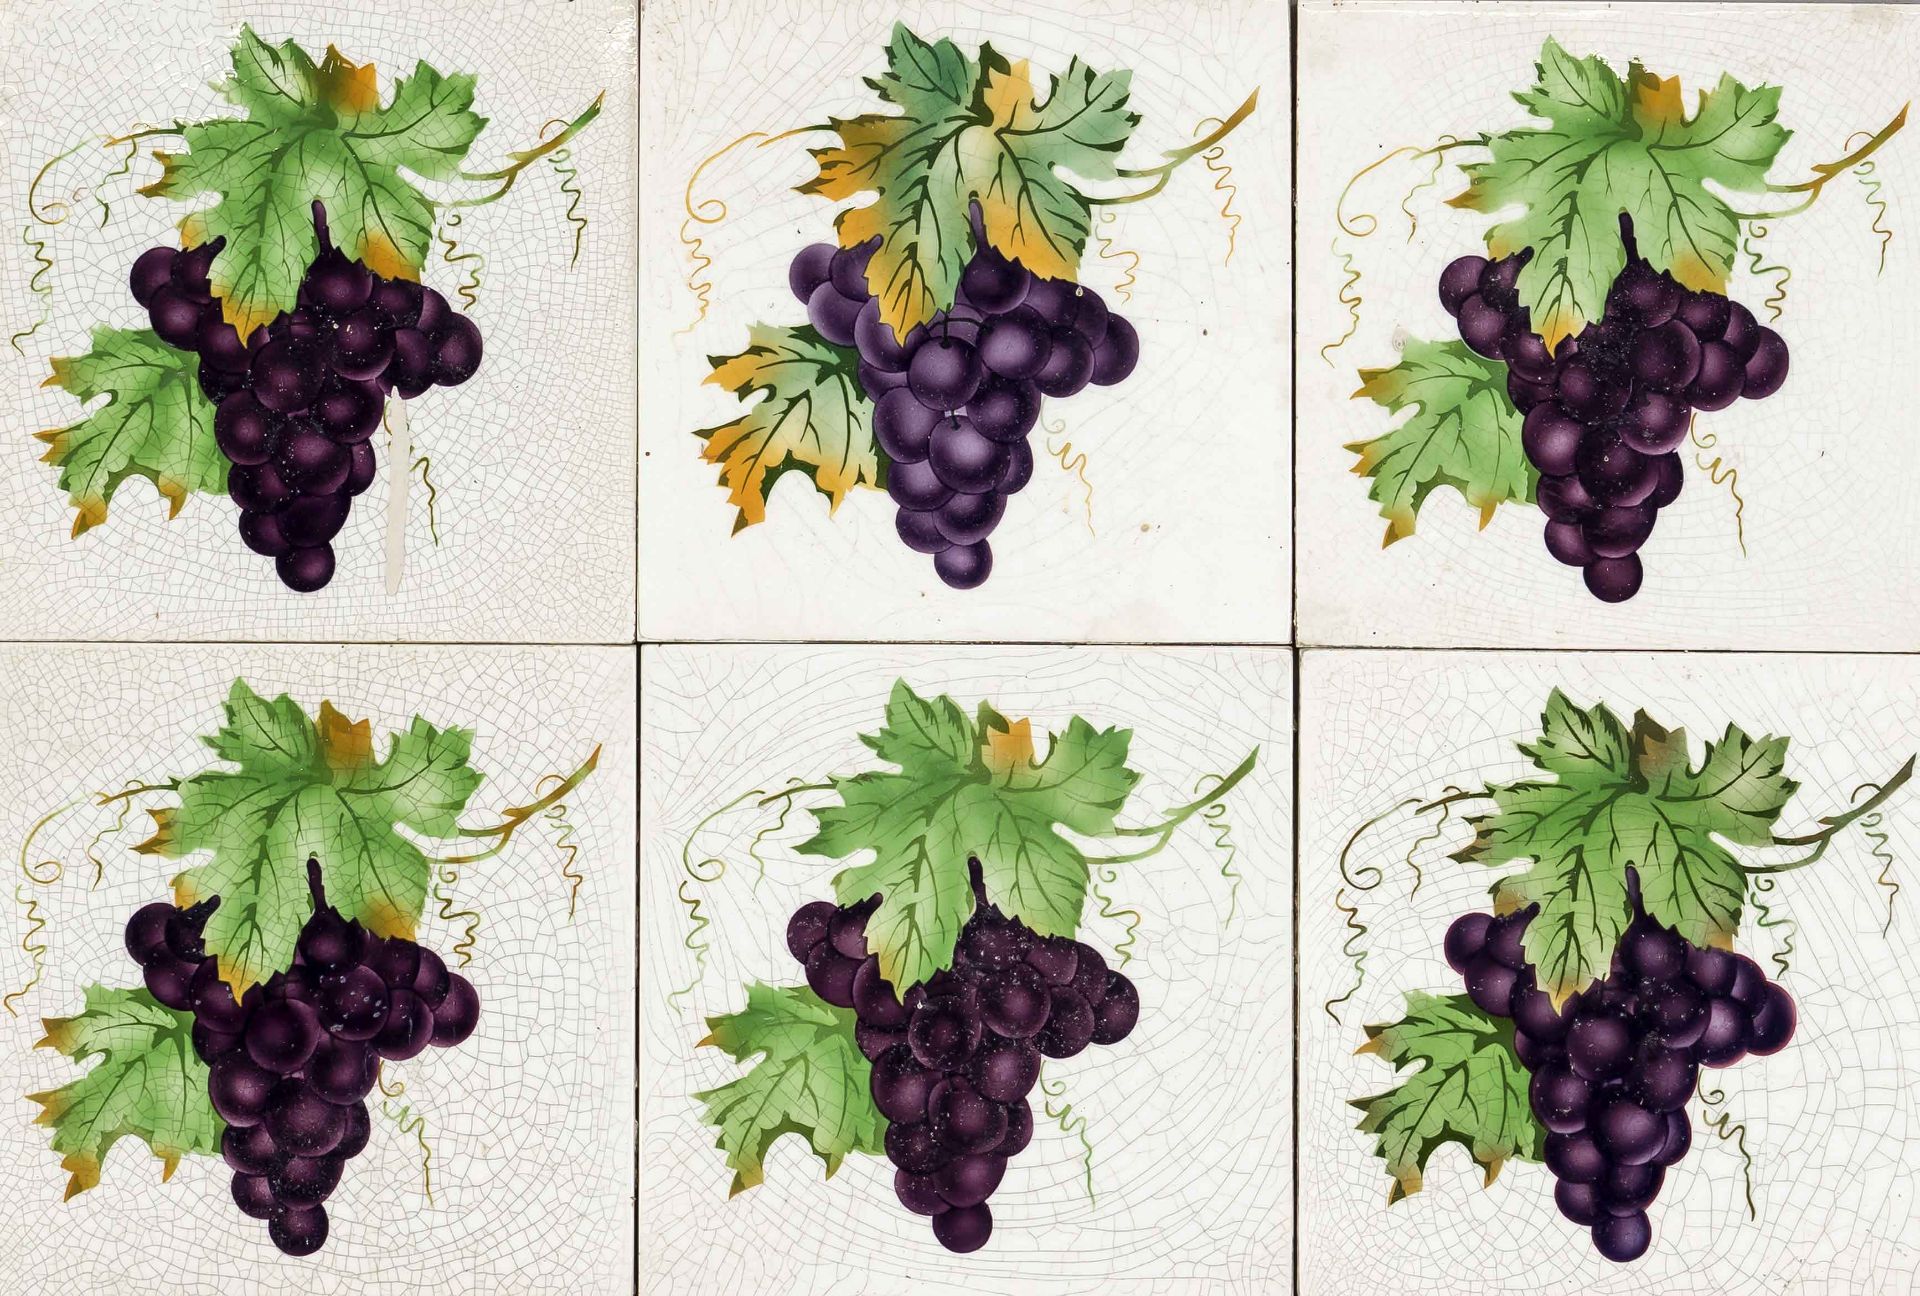 50 Tiles with Grape Decoration, 1st half 20th century, polychrome stencilled decoration with